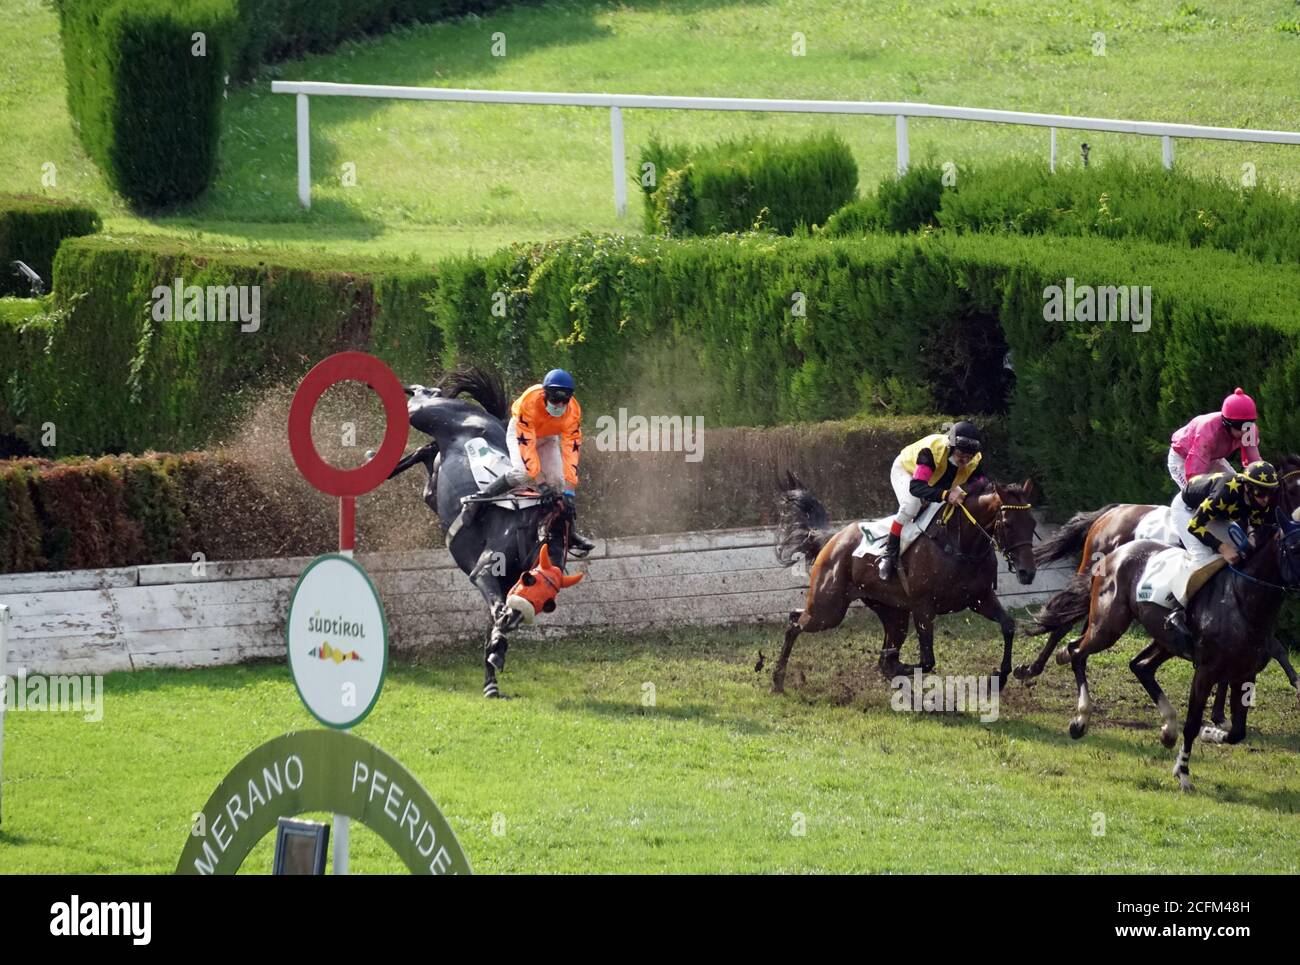 A jockey falling from a horse at the race while others running further at the race in Merano, Italy on Sept. 6th of 2020. Stock Photo